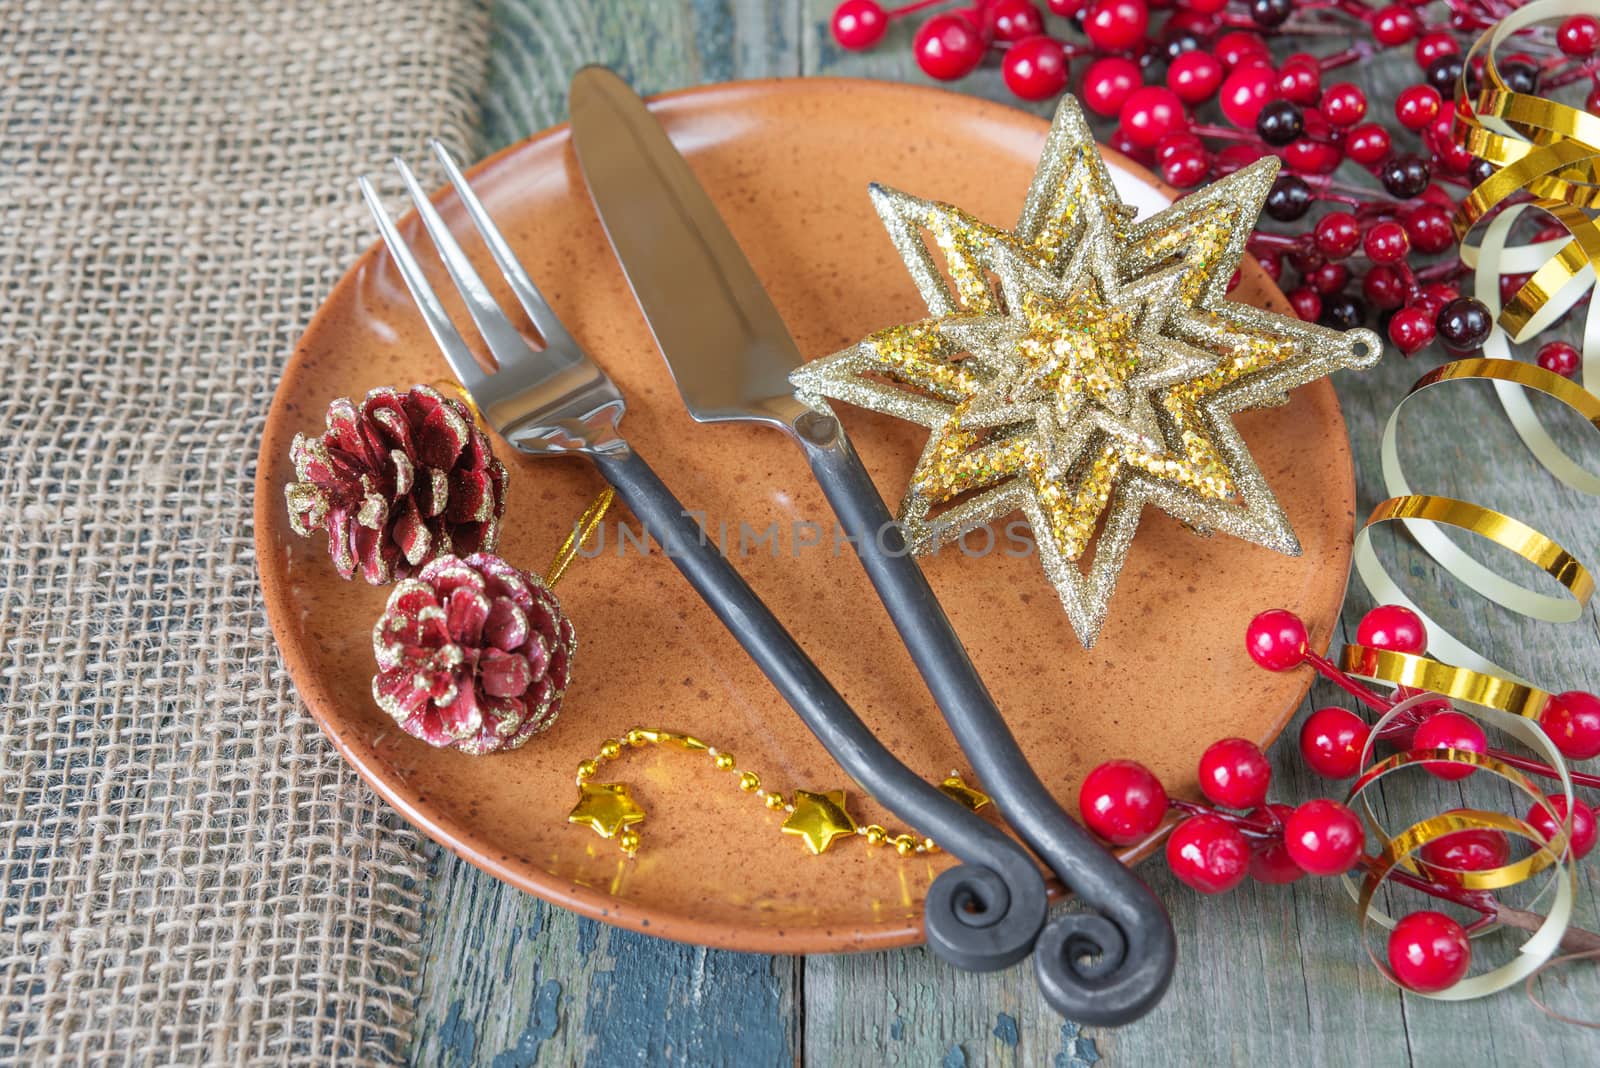 Beautiful Christmas table: handmade still  knife and fork are on the brown ceramic plate, golden star and ribbon, red holly berries which is located on a old wooden boards